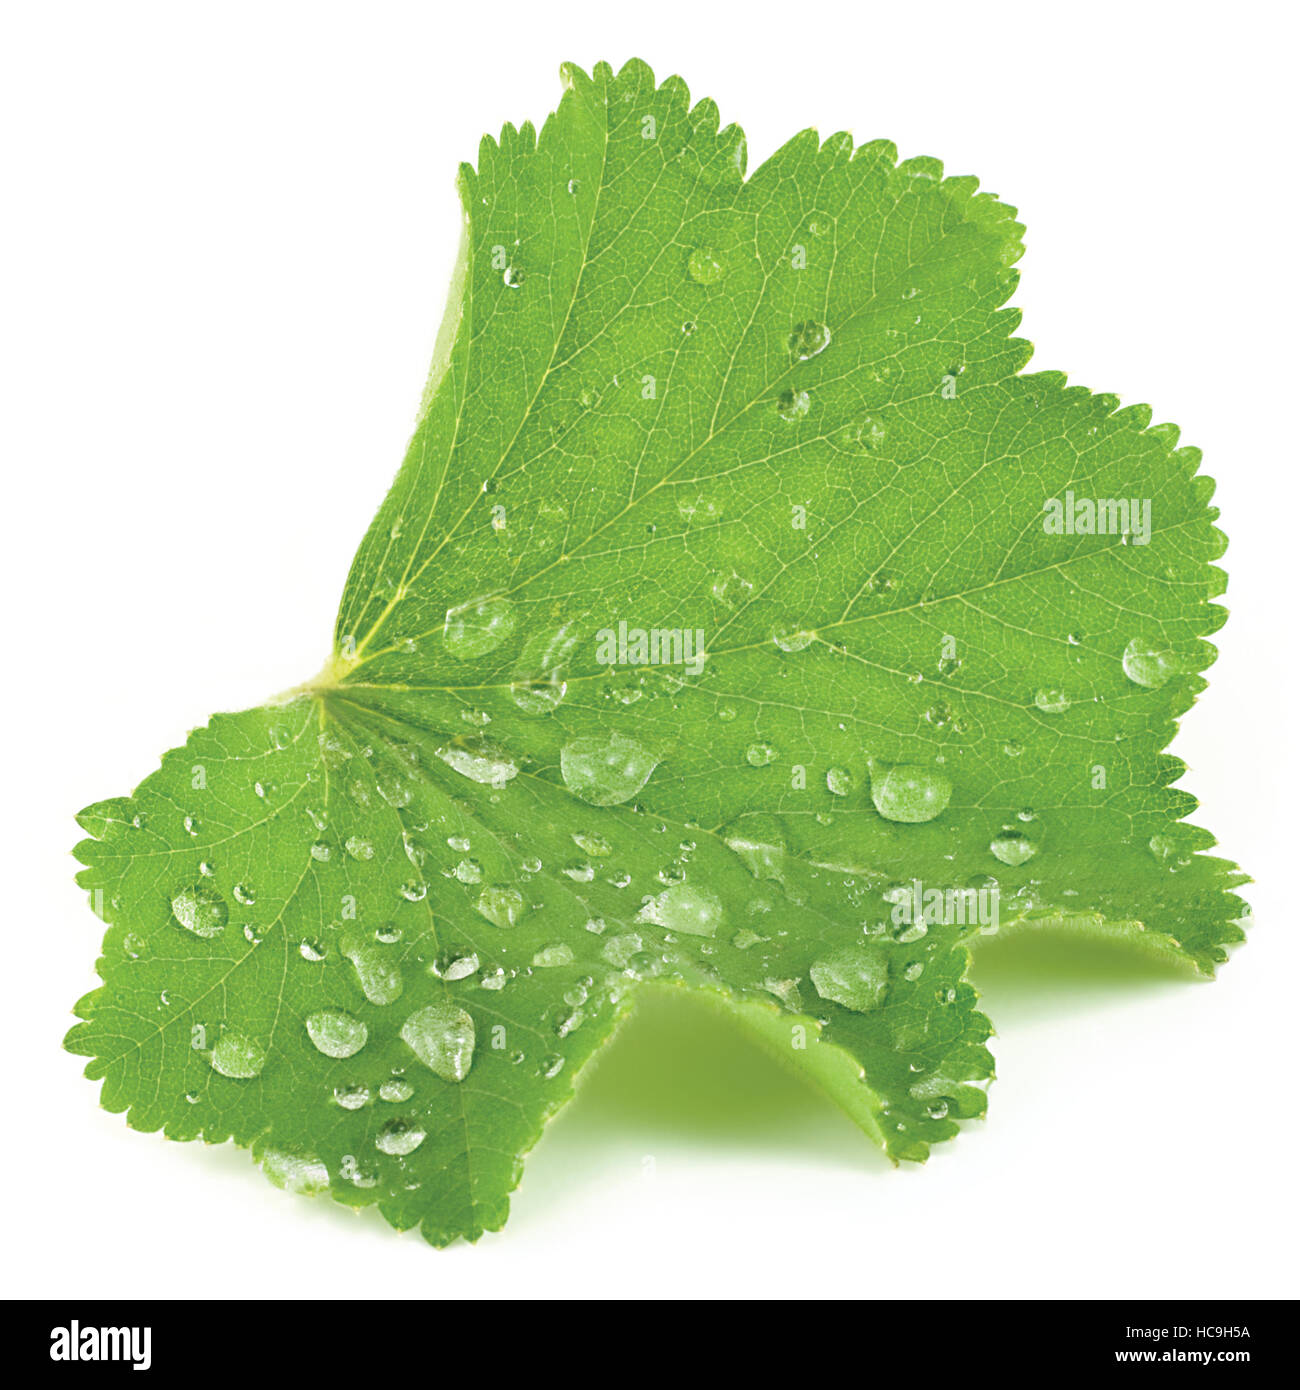 Abstract common lady's mantle green leaf closeup with raindrops, isolated Stock Photo